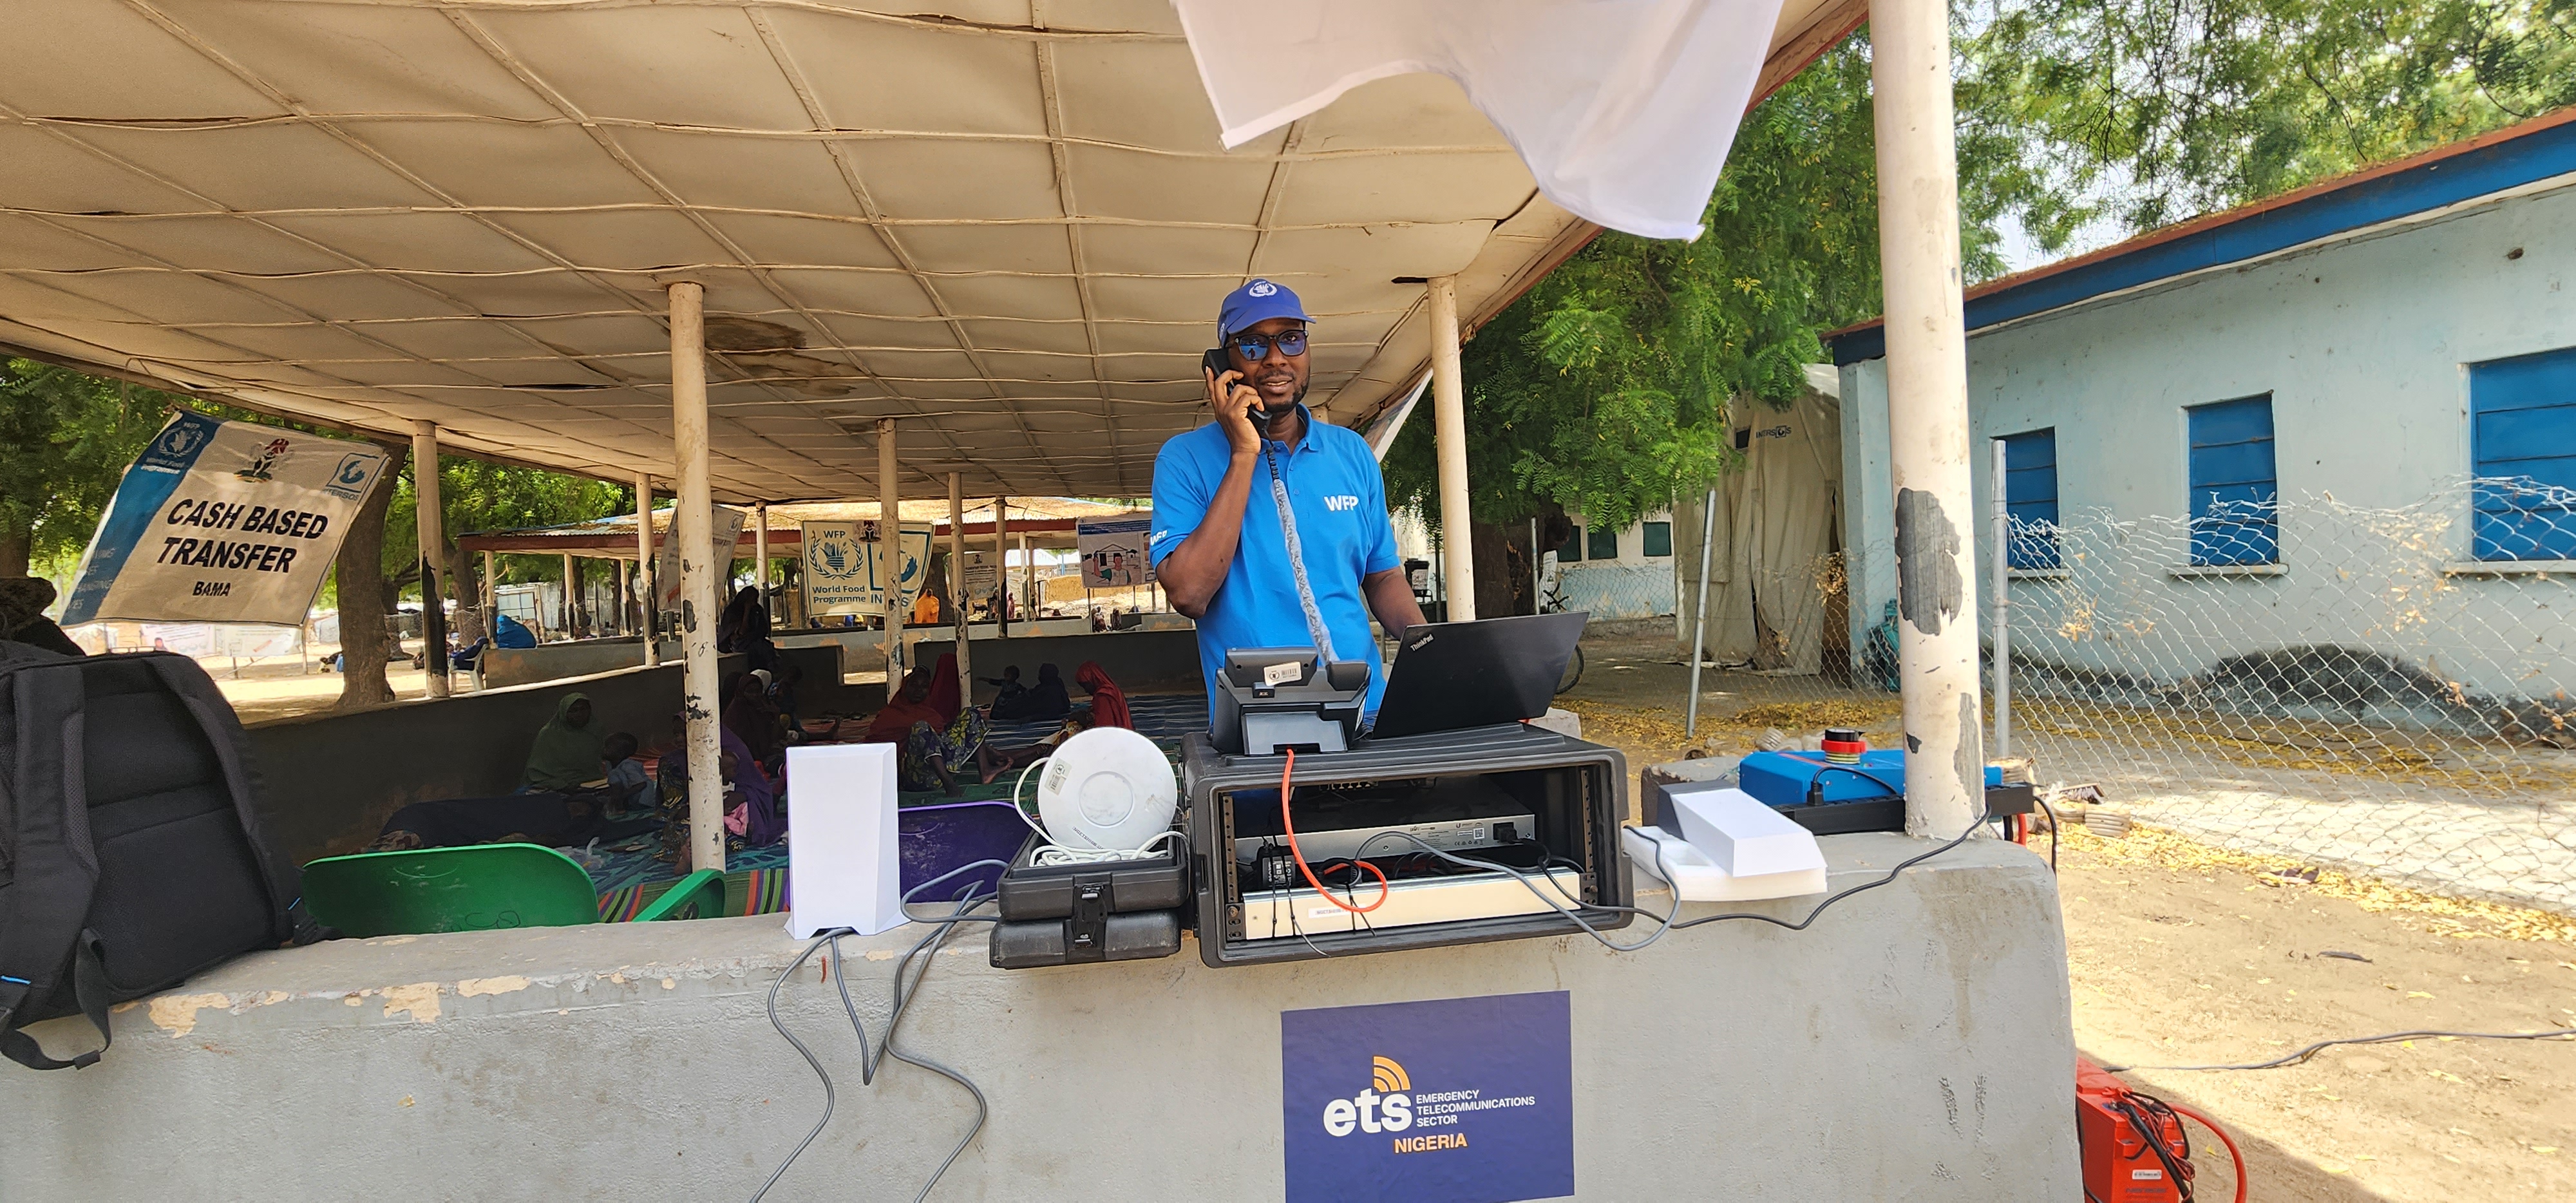 WFP uses the CrisisNet kit to hold a call from the deep field. Photo credit: WFP/Caleb Anwara.